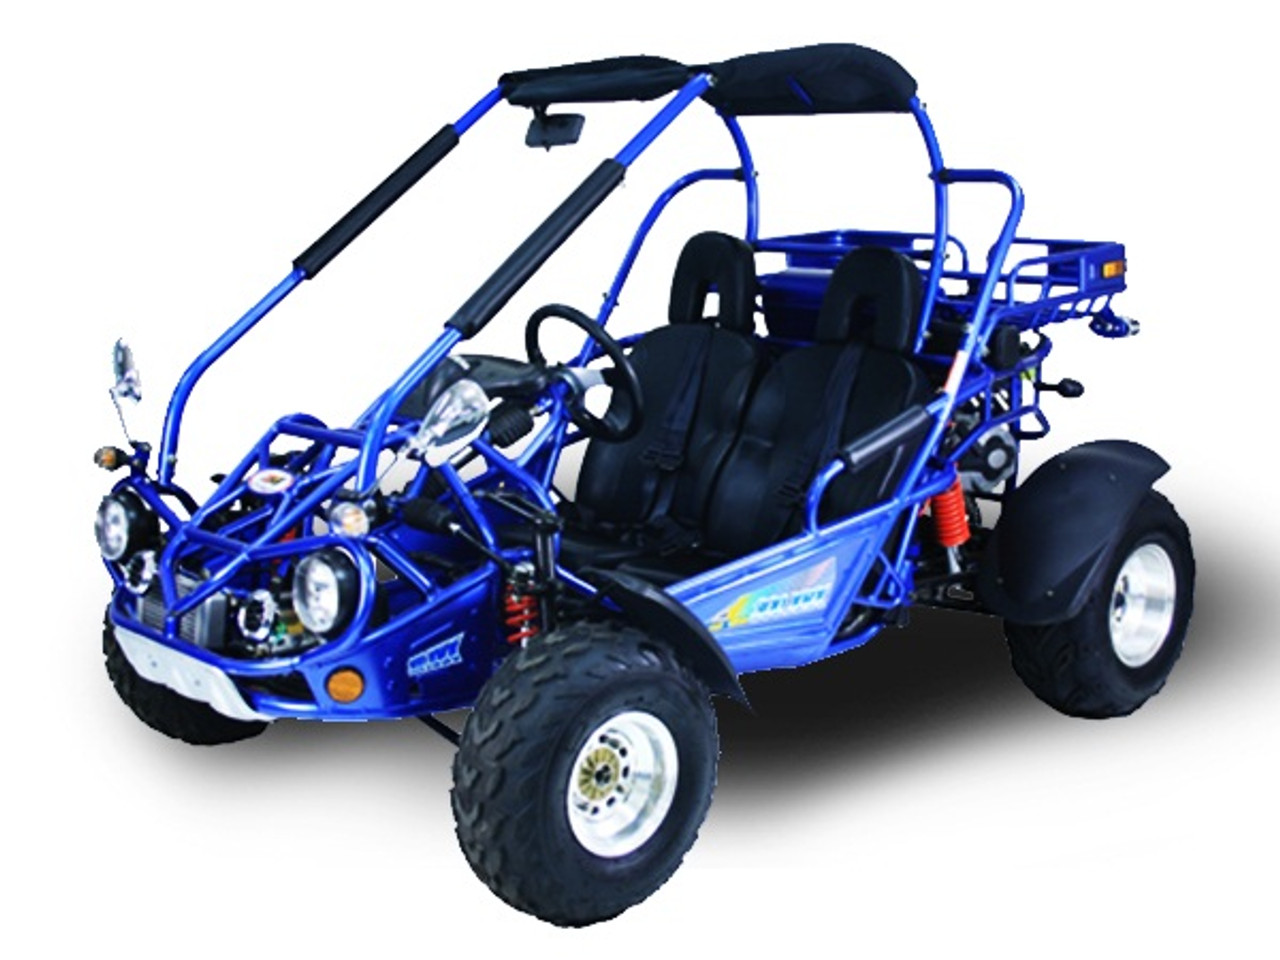 Trailmaster 300 XRX High Quality 300CC Electric Start, 4-Stroke, Single Cylinder, Water Cooled Go Kart